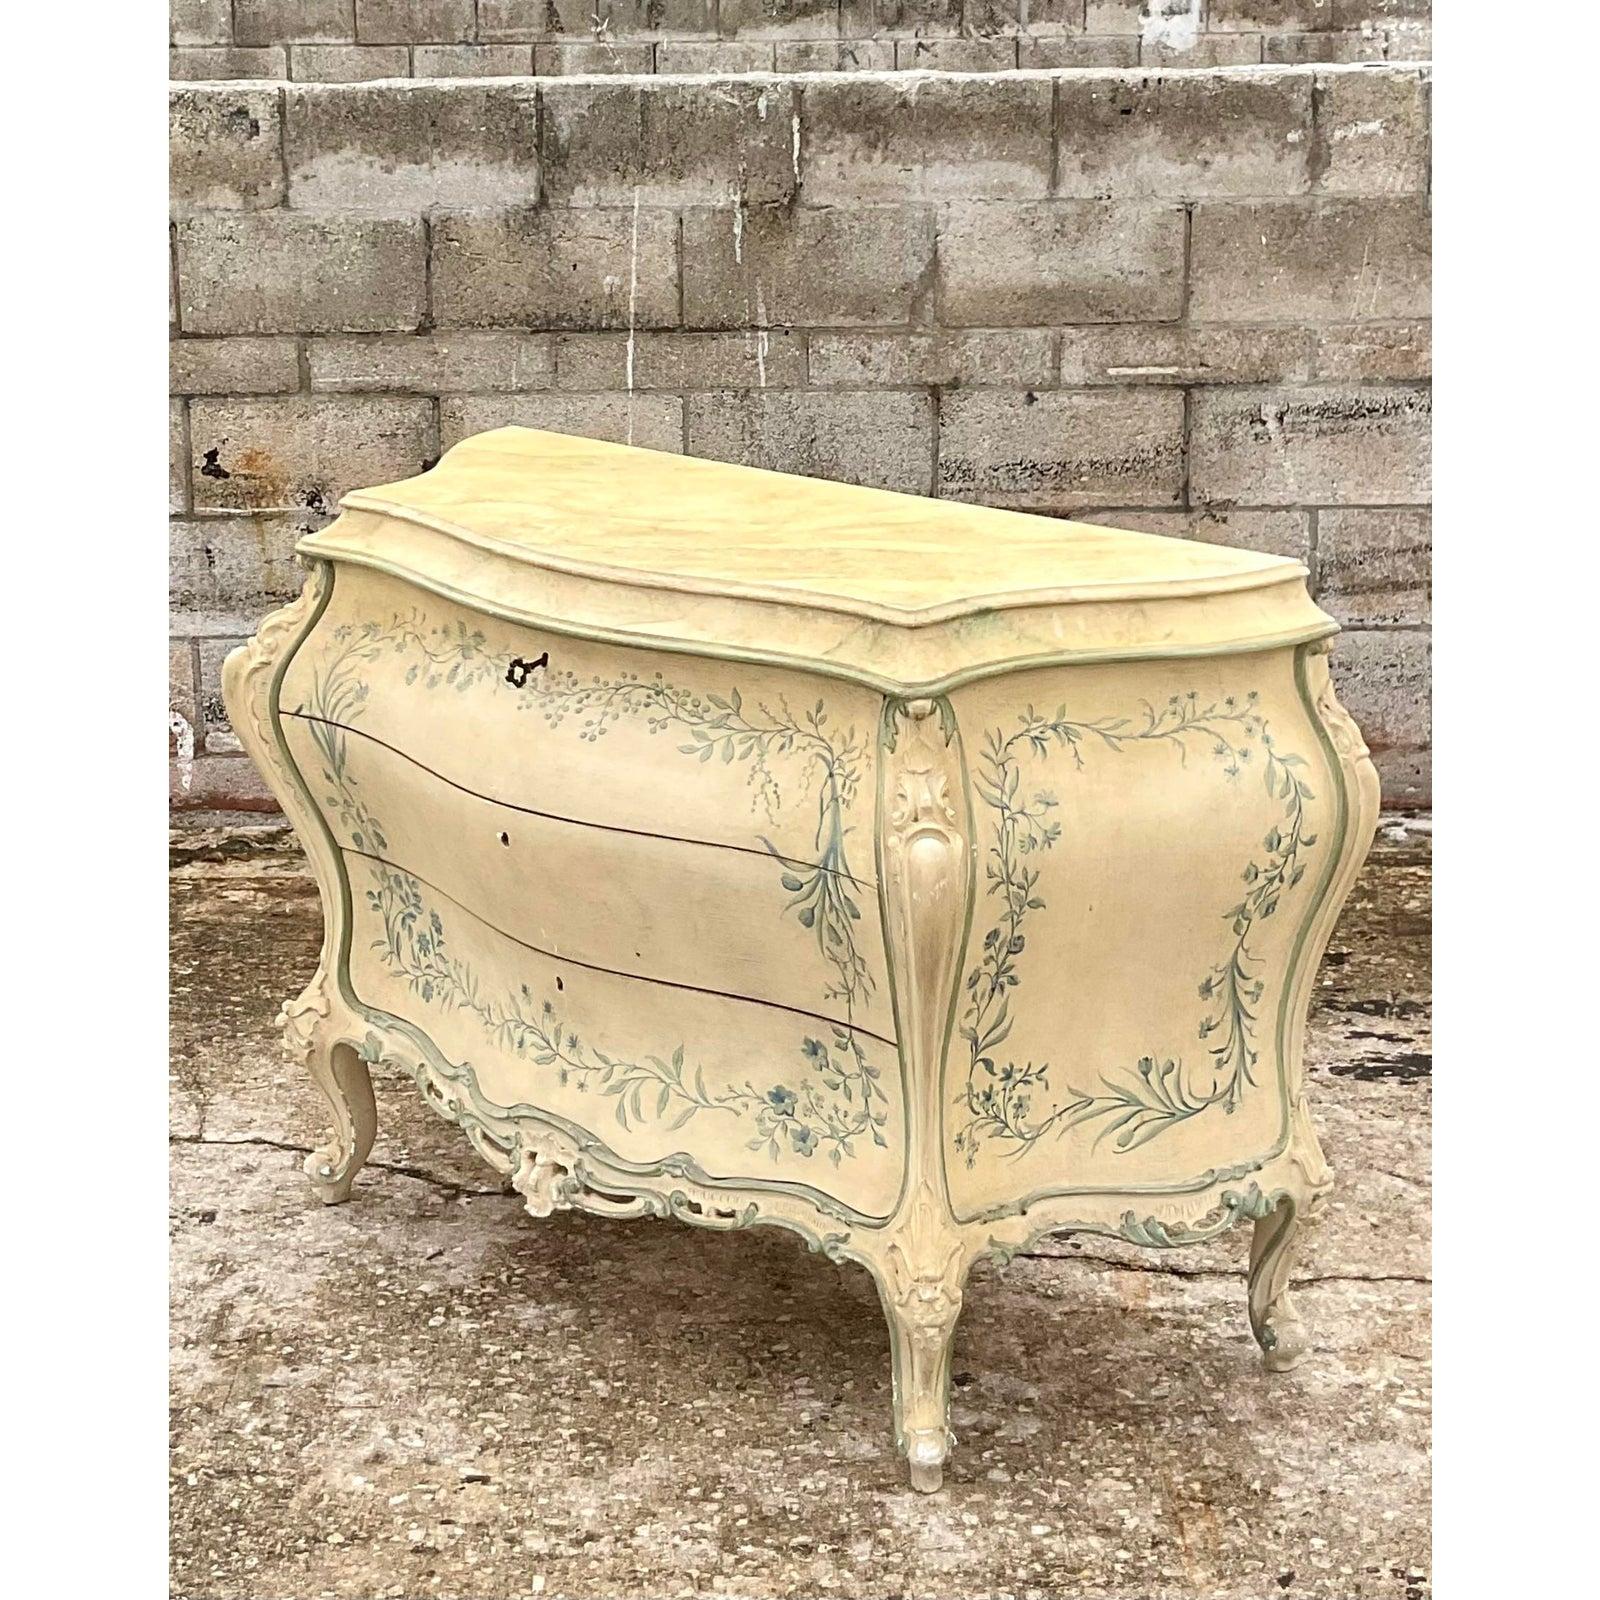 Spectacular vintage Regency hand painted commode. The height of Parisian chic in iconic blue and white. Three drawers that open with a key and beautiful ring of floating flowers. Hand carved detail. Acquired from a Palm Beach estate.